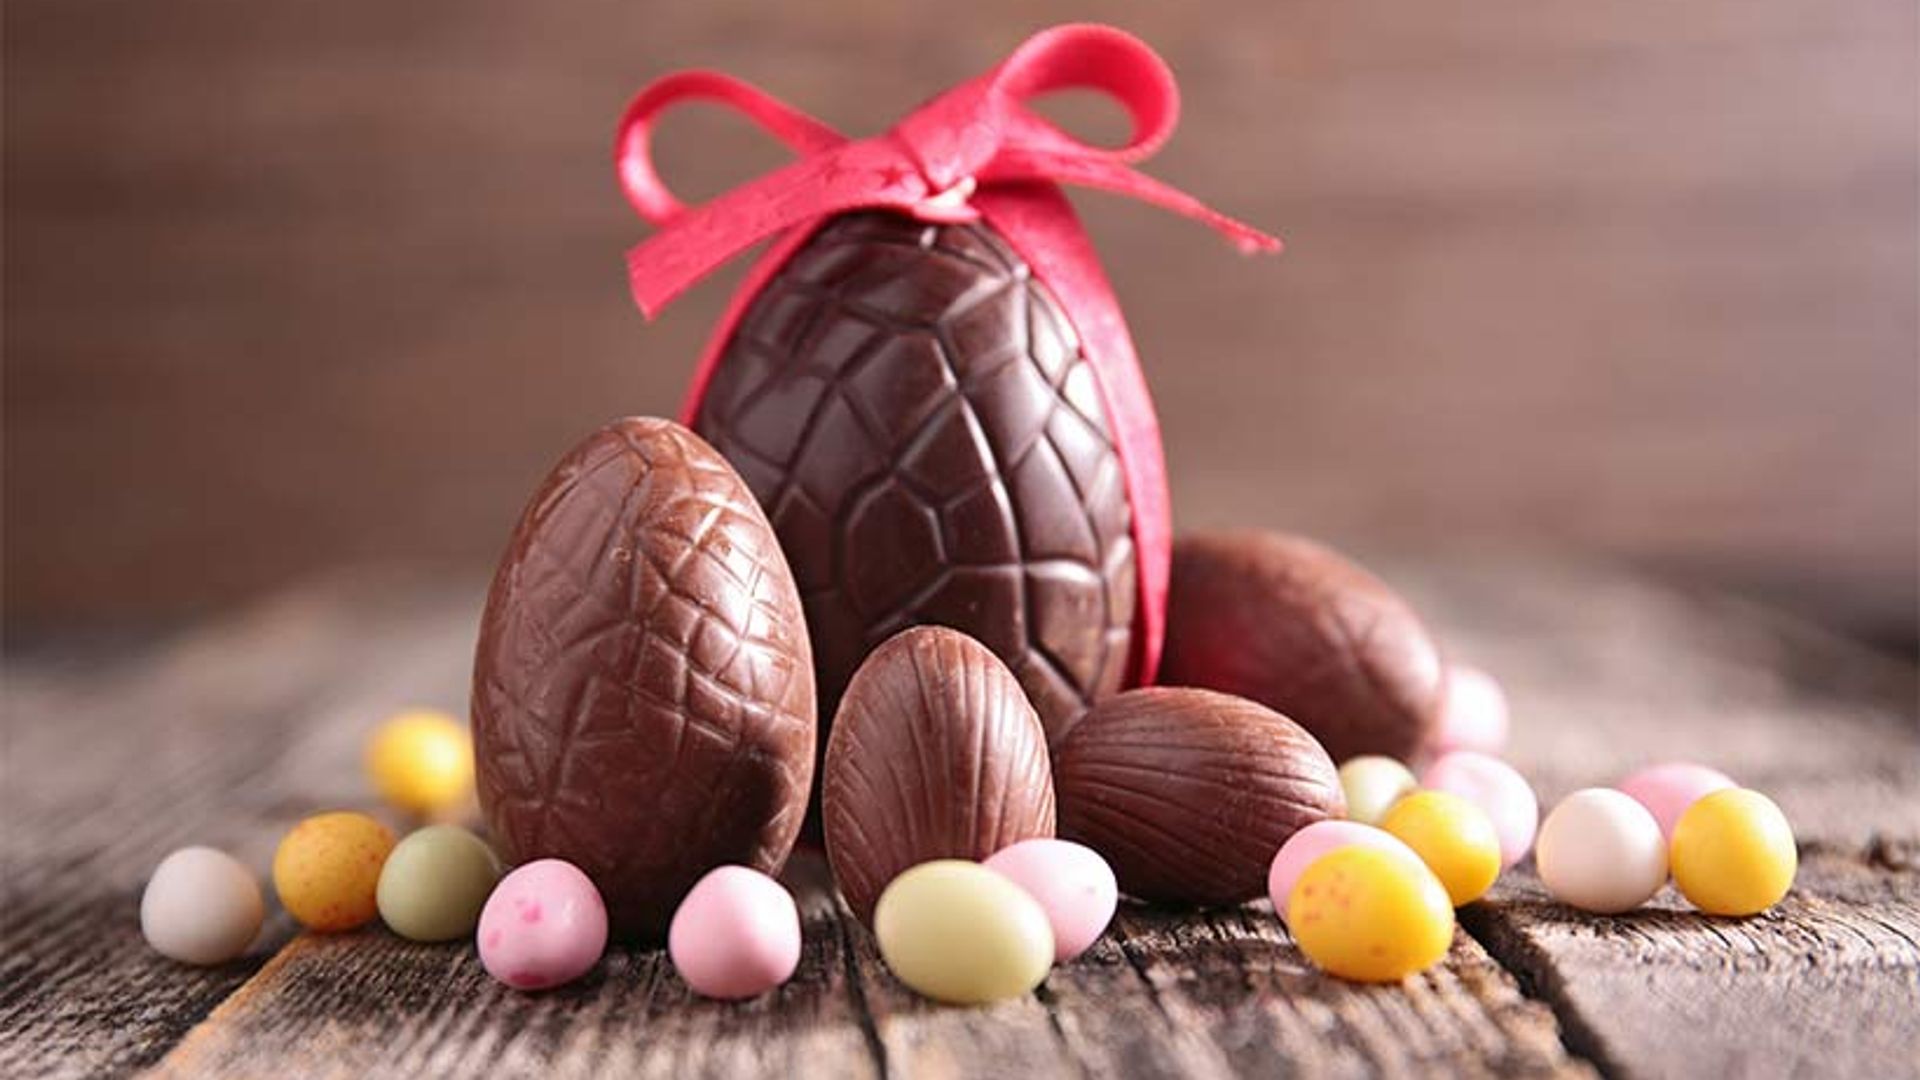 The best Easter Eggs for 2017